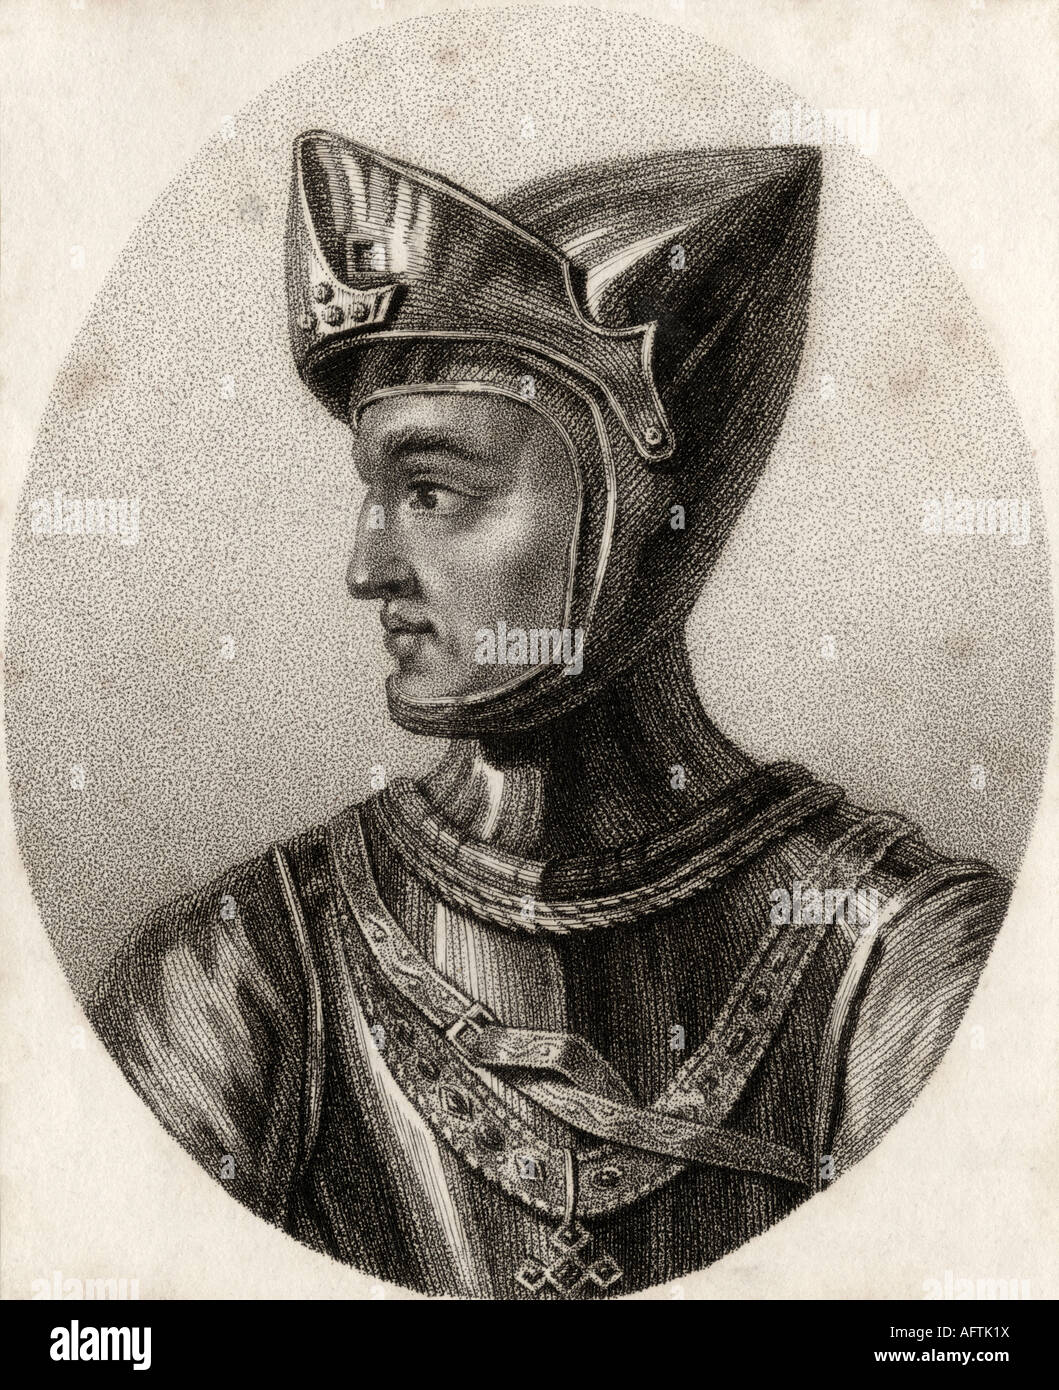 Henry of Grosmont, 1st Duke of Lancaster, 4th Earl of Leicester and Lancaster, Earl of Derby, 1310 - 1361. Stock Photo